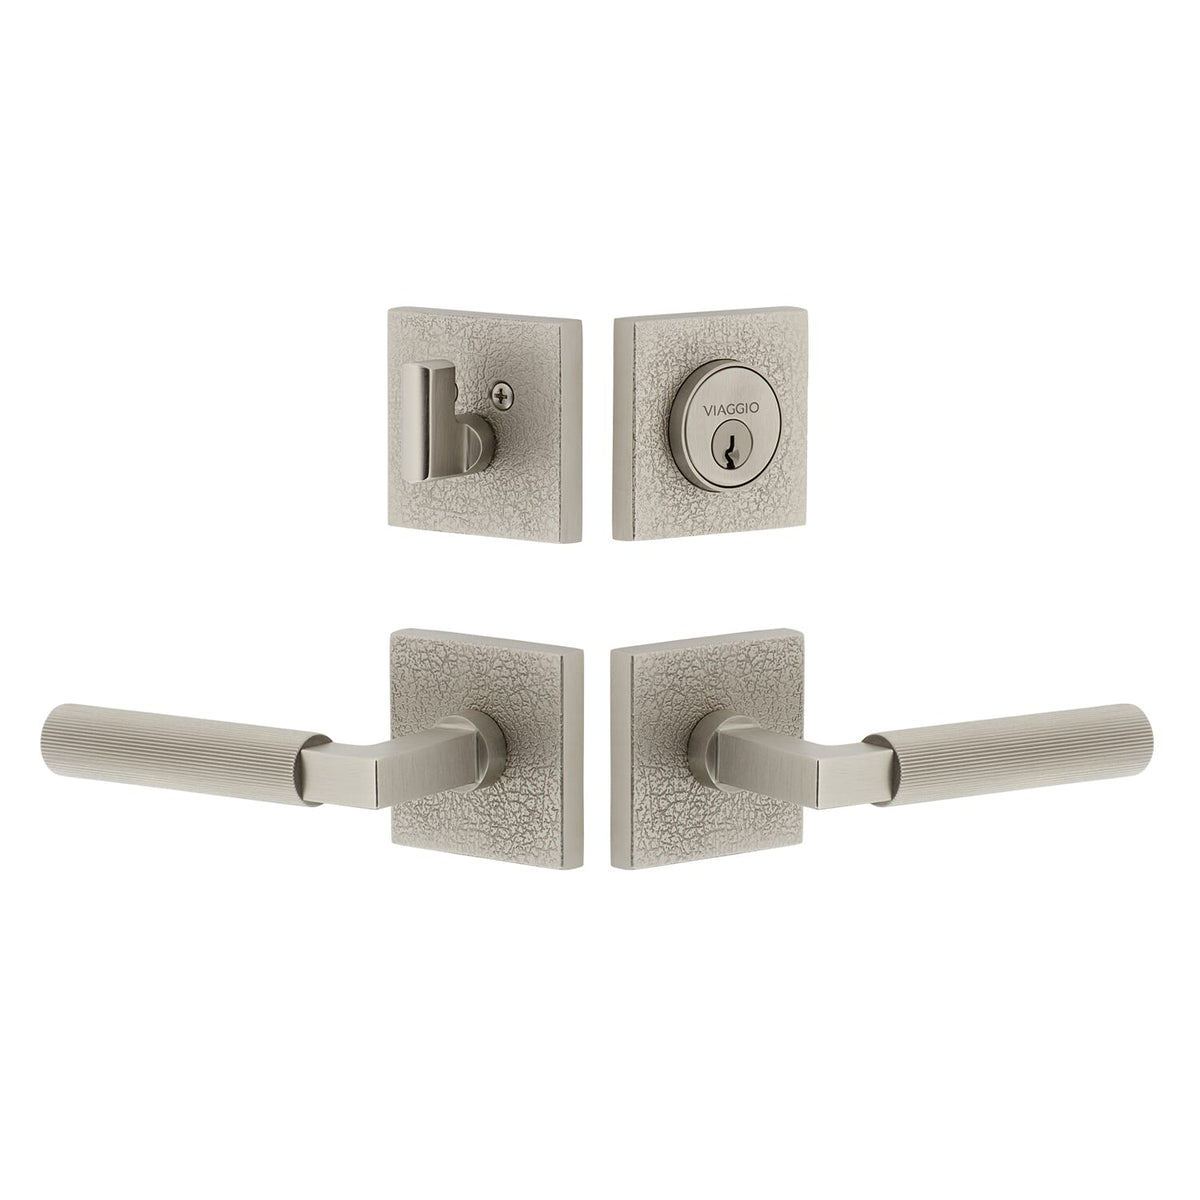 Quadrato Leather Rosette Entry Set with Contempo Fluted Lever  in Satin Nickel